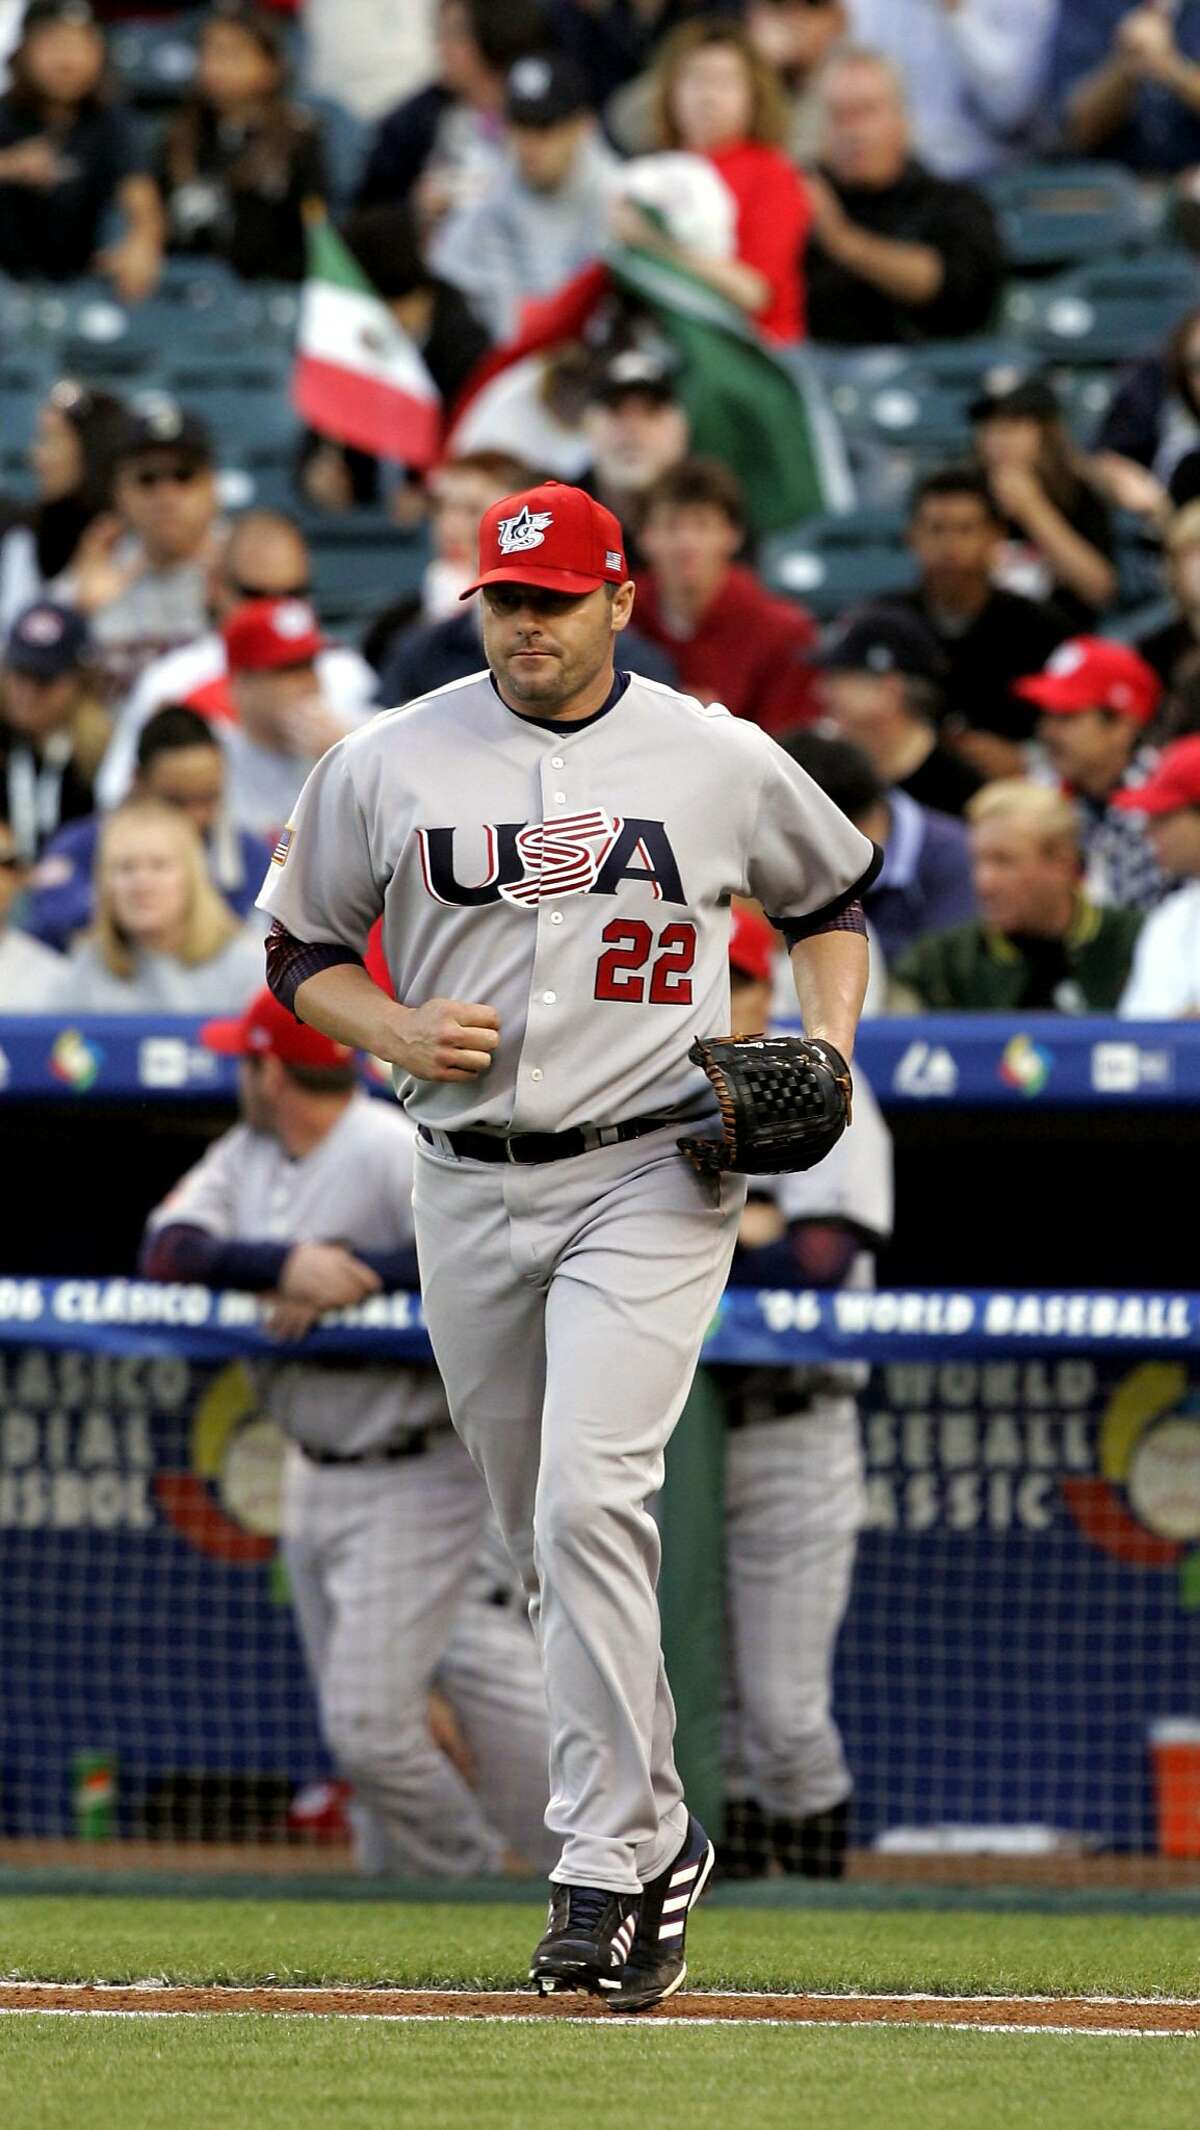 Roger Clemens of Team USA takes the mound to pitch to Mexico in the first inning of their second-round World Baseball Classic game at Angel Stadium in Anaheim, Calif., Thursday, March 16, 2006. (AP Photo/Reed Saxon)